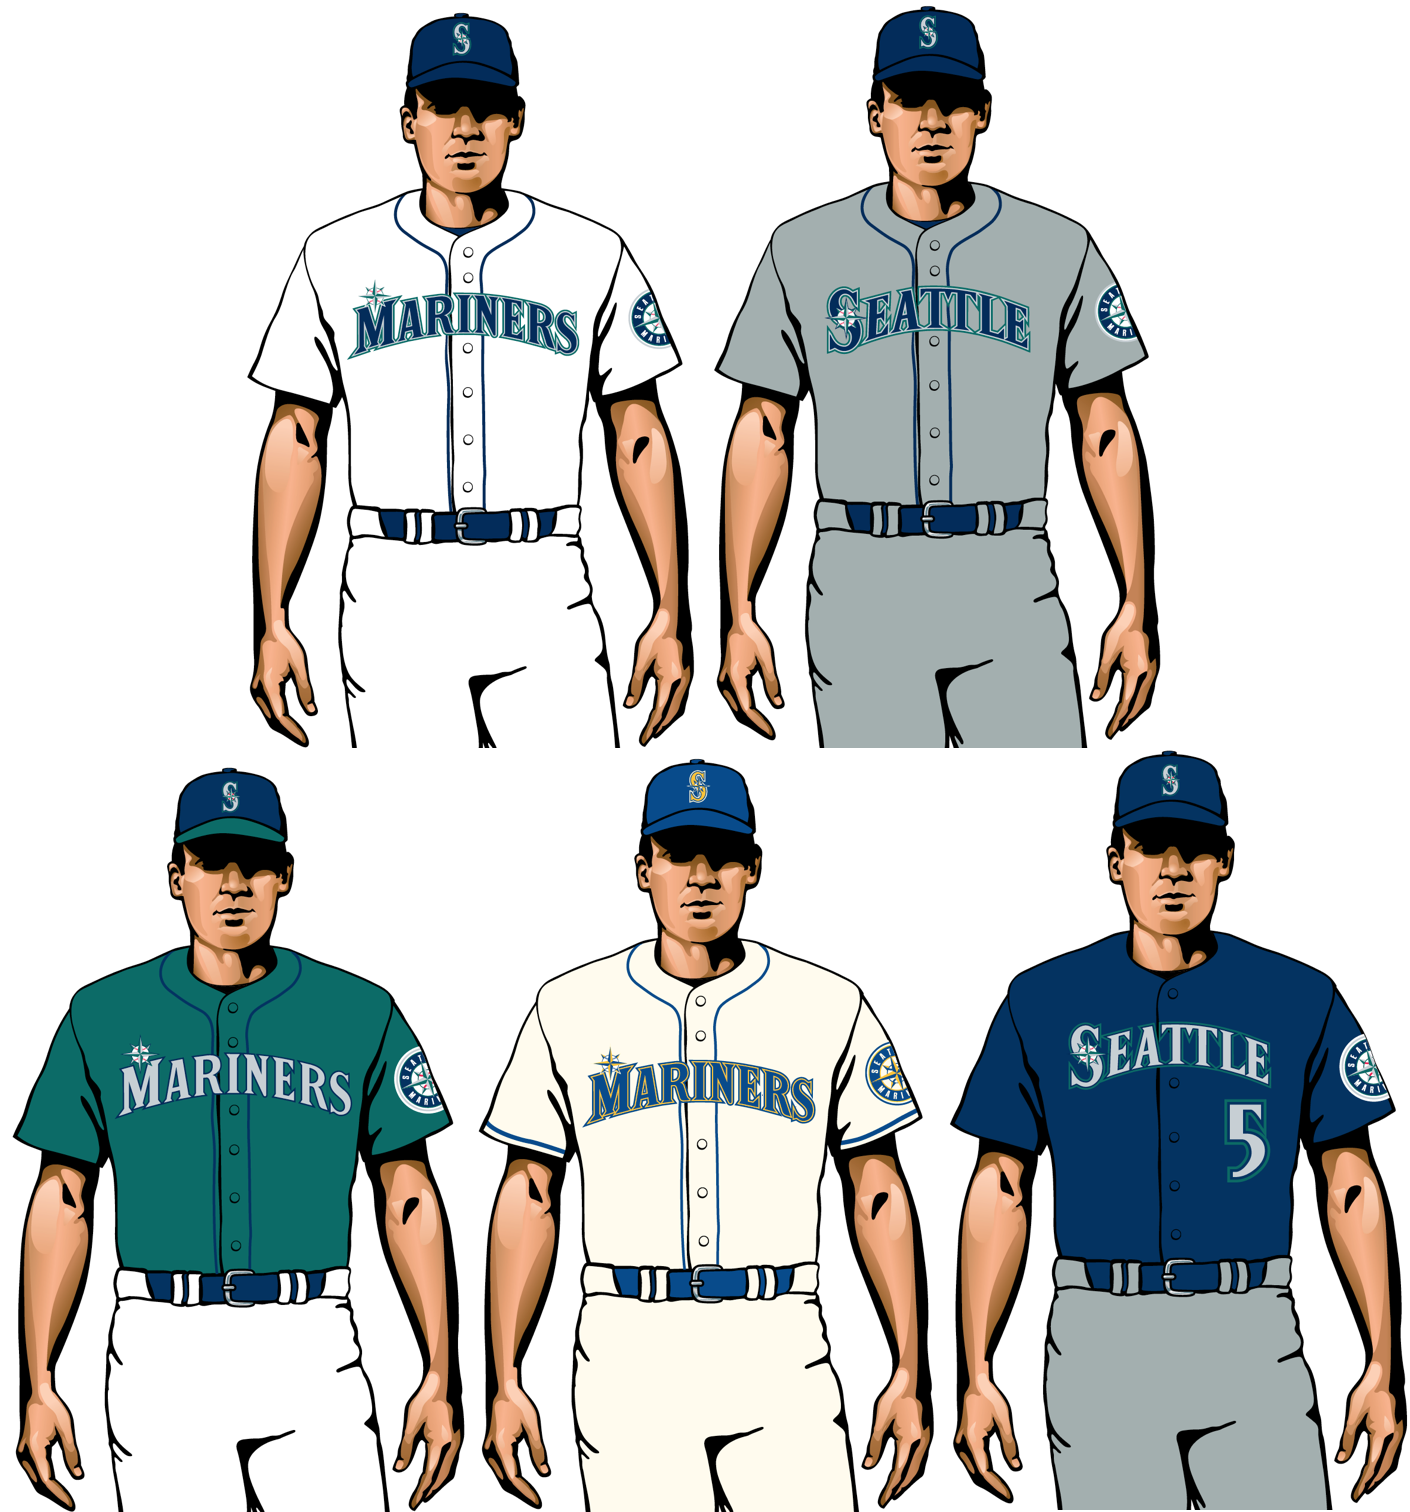 most popular mariners jersey